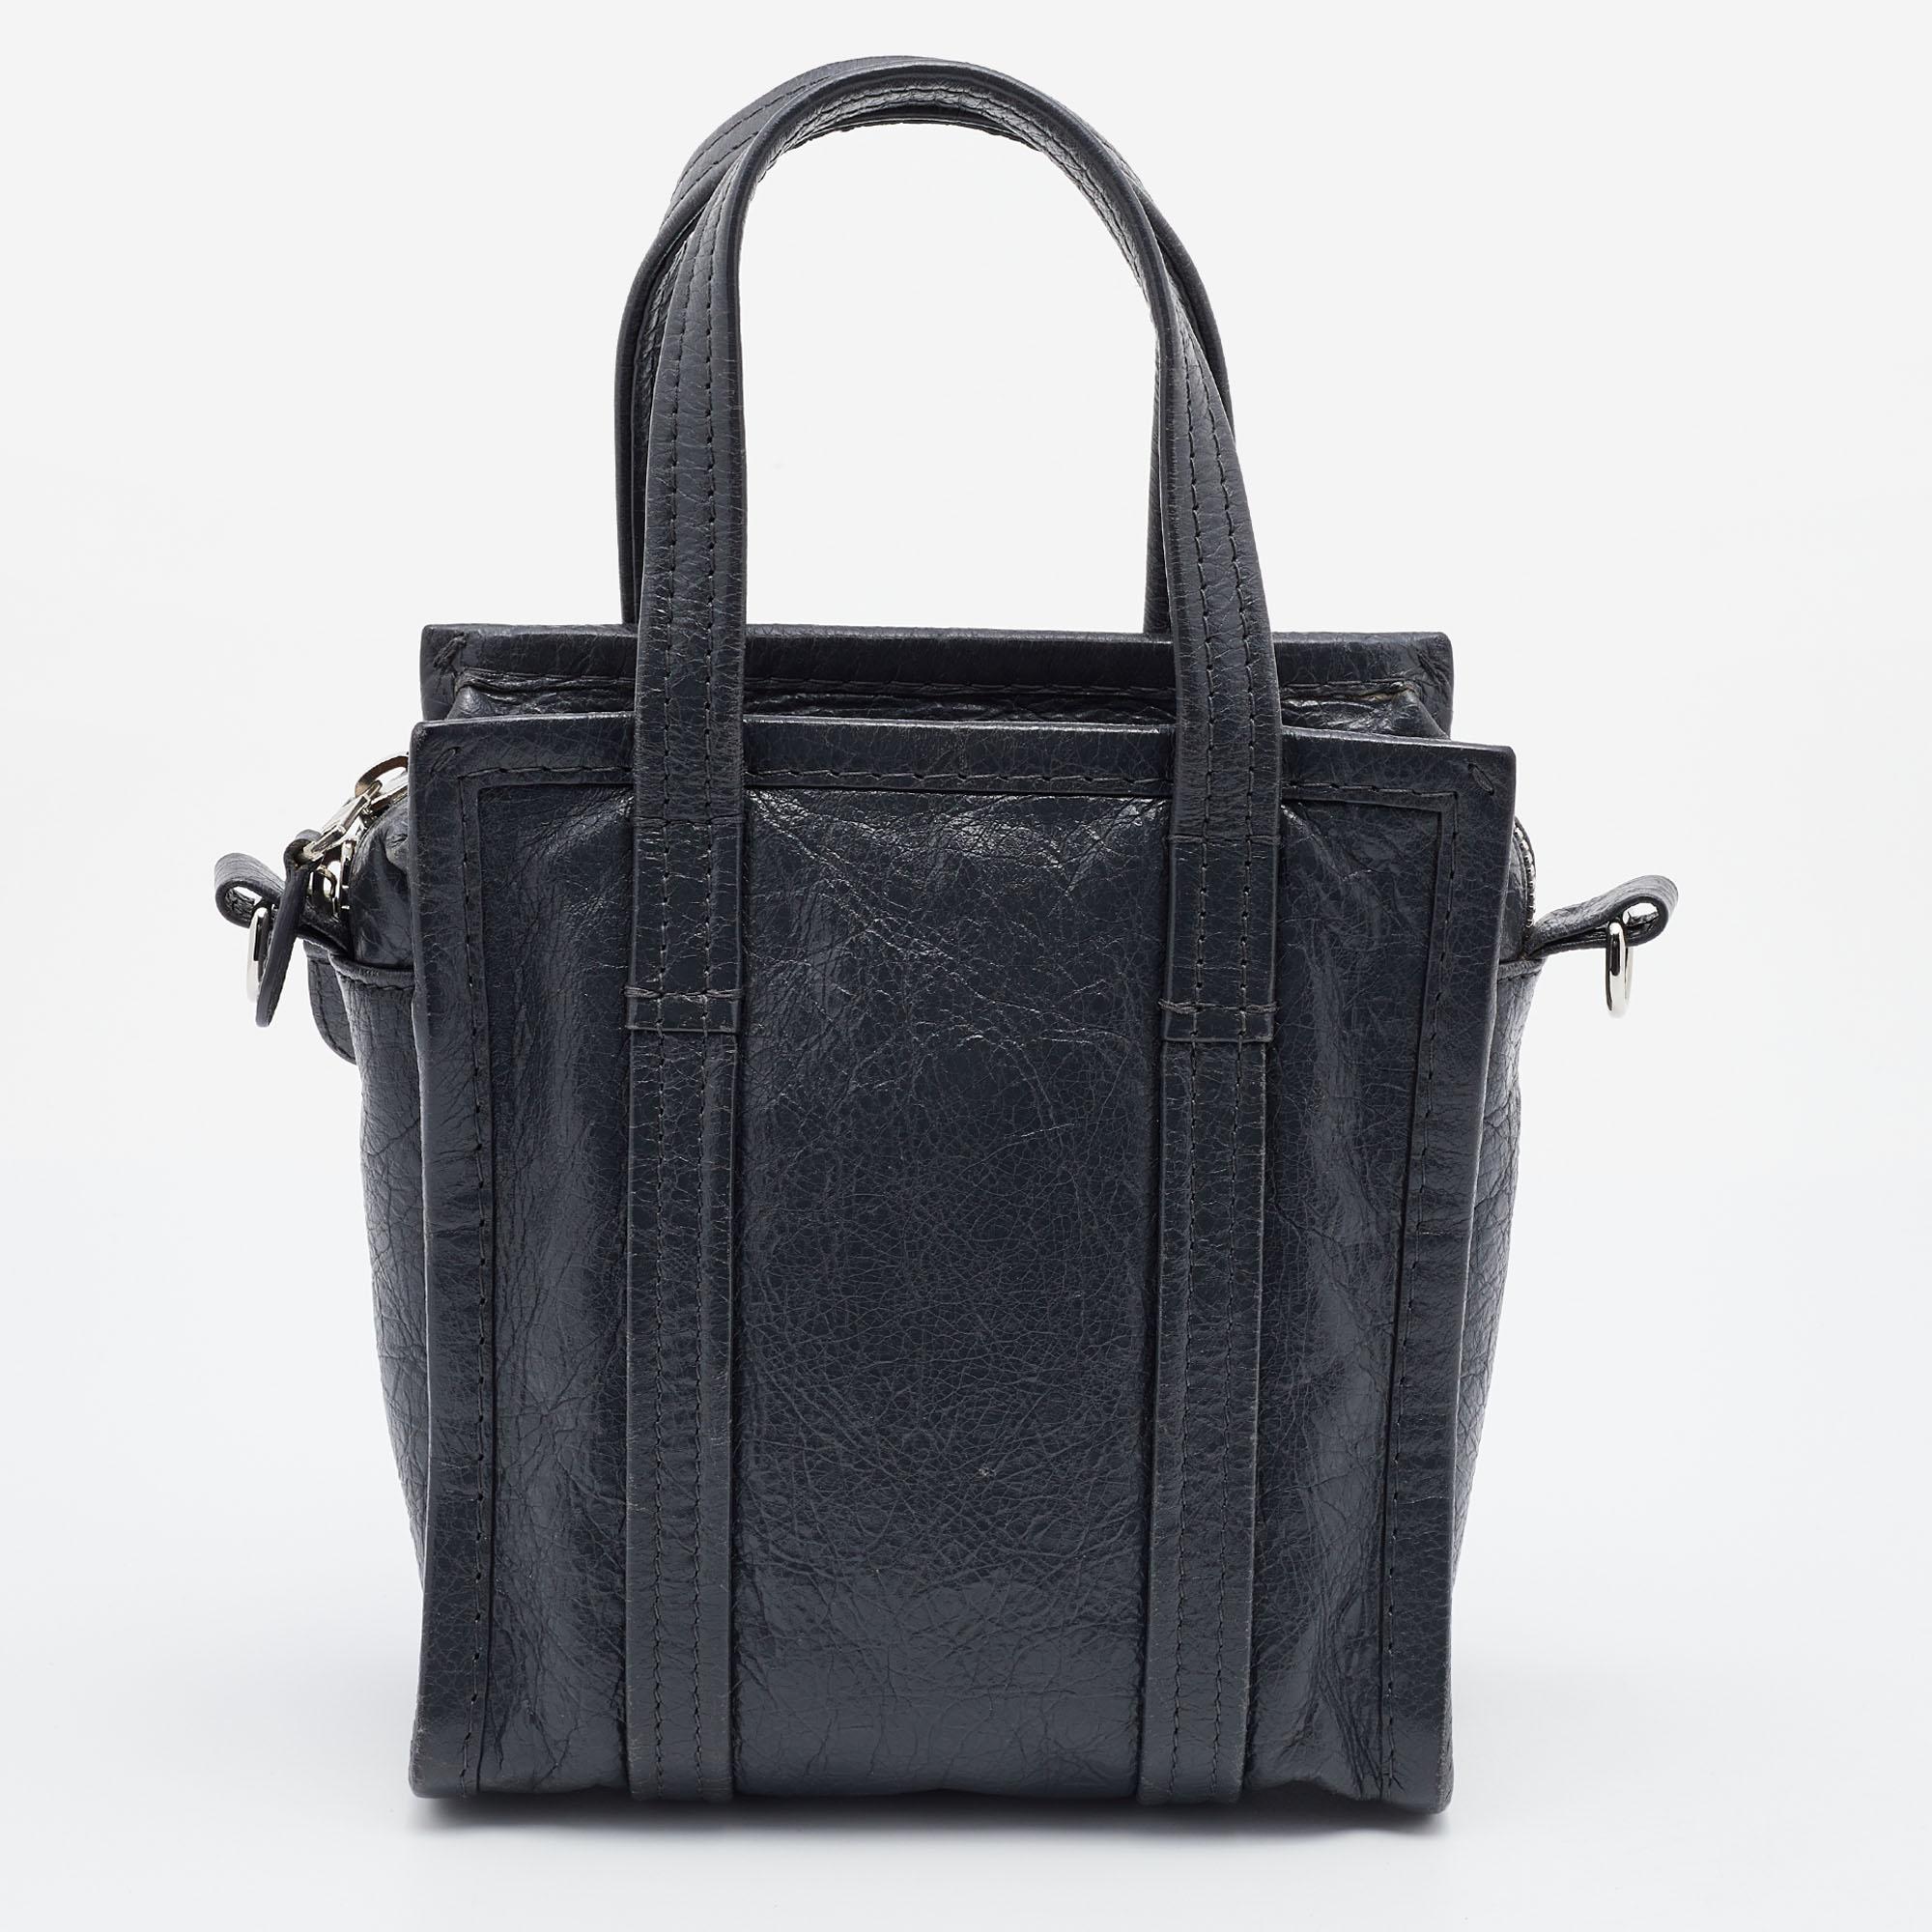 This alluring tote bag for women has been designed to assist you on any day. Convenient to carry and fashionably designed, the tote is cut with skill and sewn into a great shape. It is well-equipped to be a reliable accessory.

Includes:  Detachable